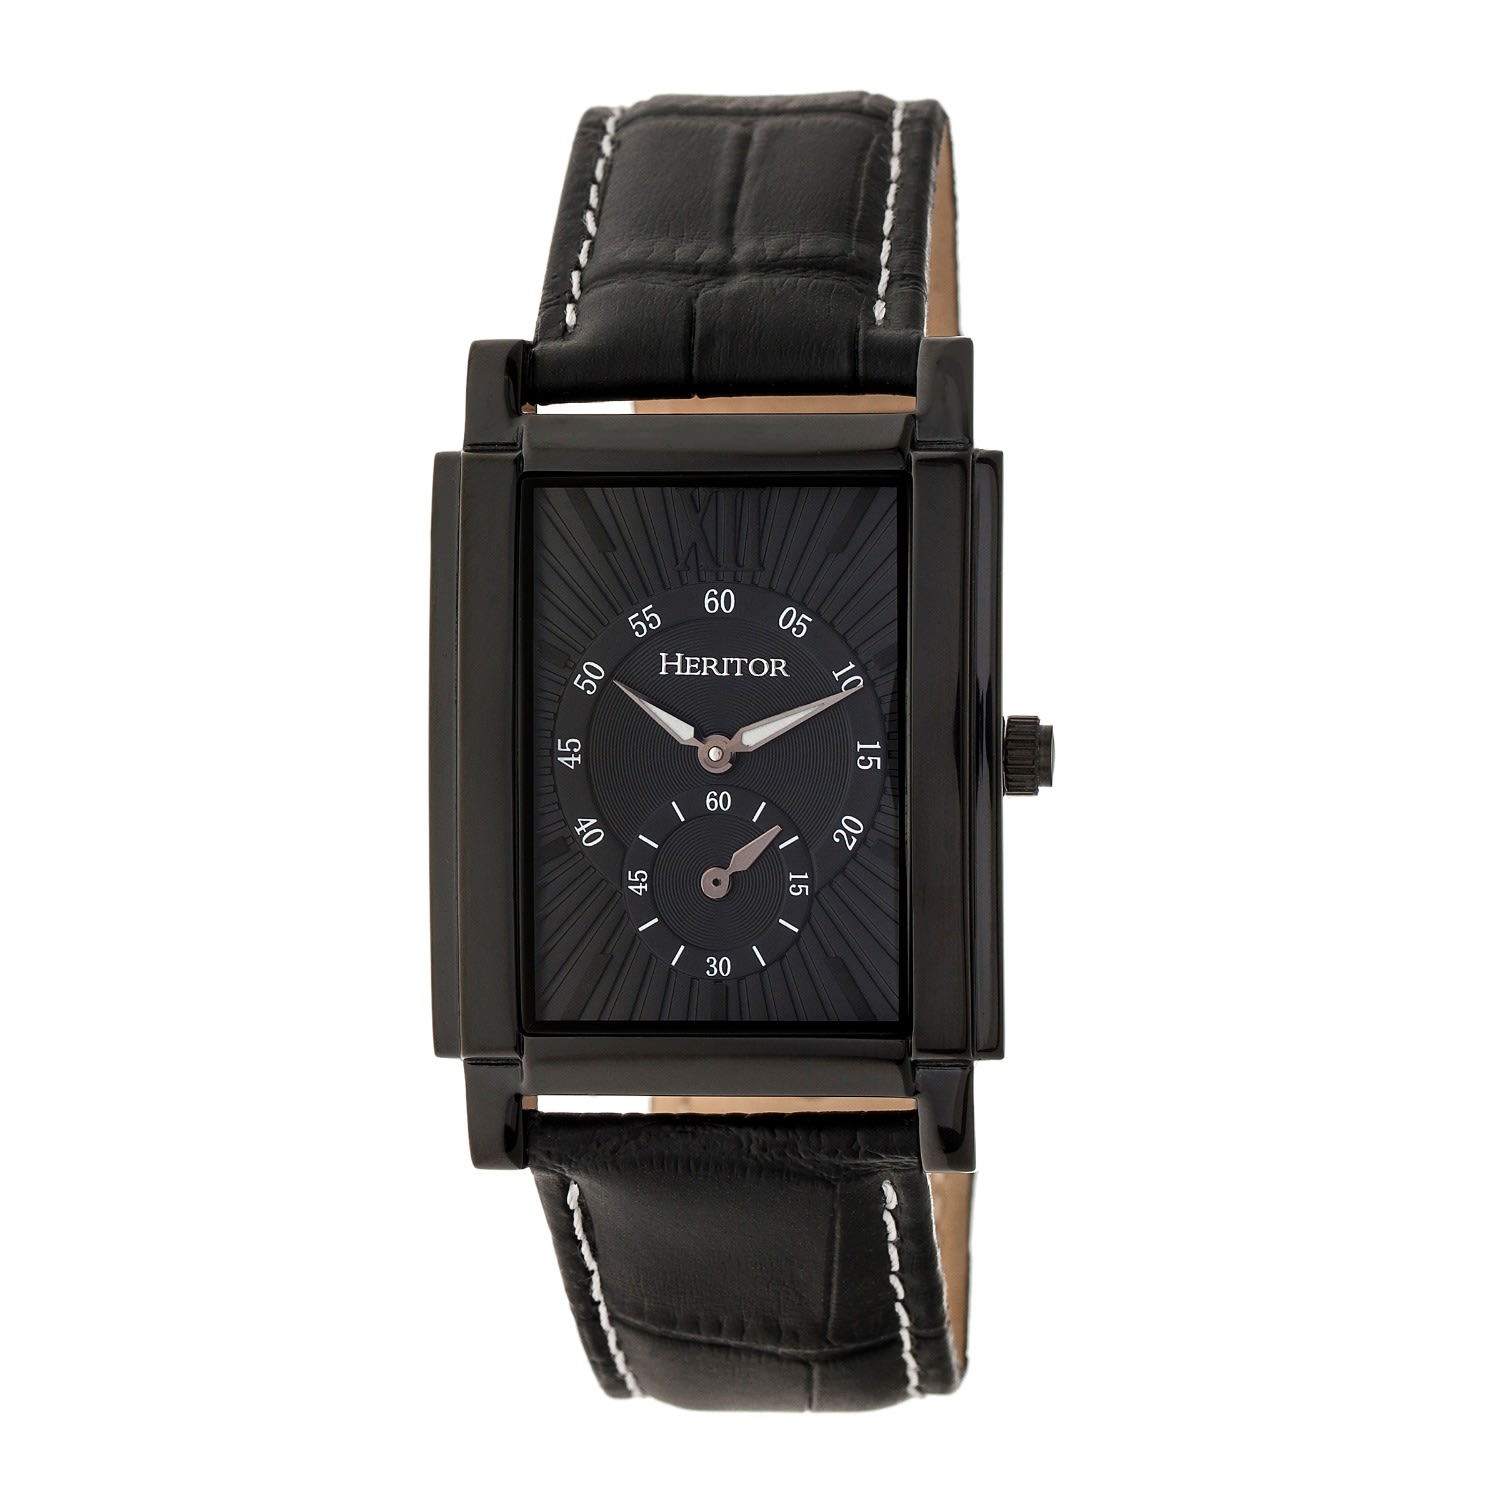 Men’s Frederick Leather-Band Watch With Seconds Sub-Dial - Black One Size Heritor Automatic